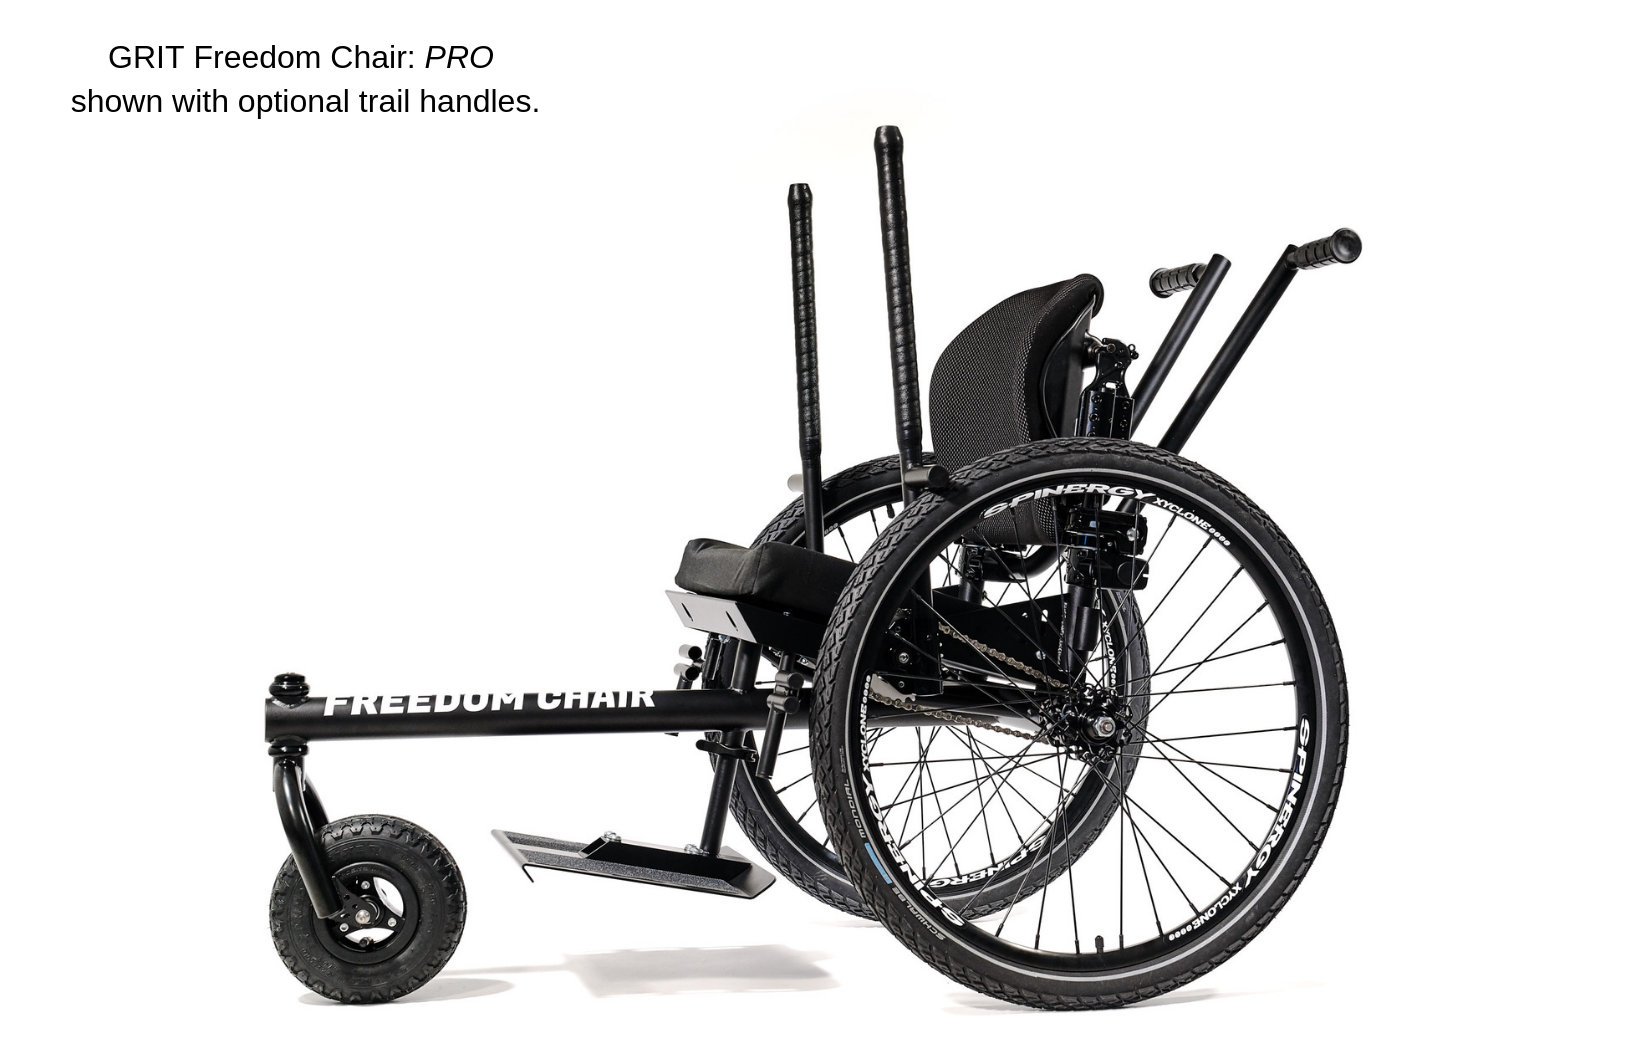 GRIT Freedom Chair Pro — GRIT Freedom Chair